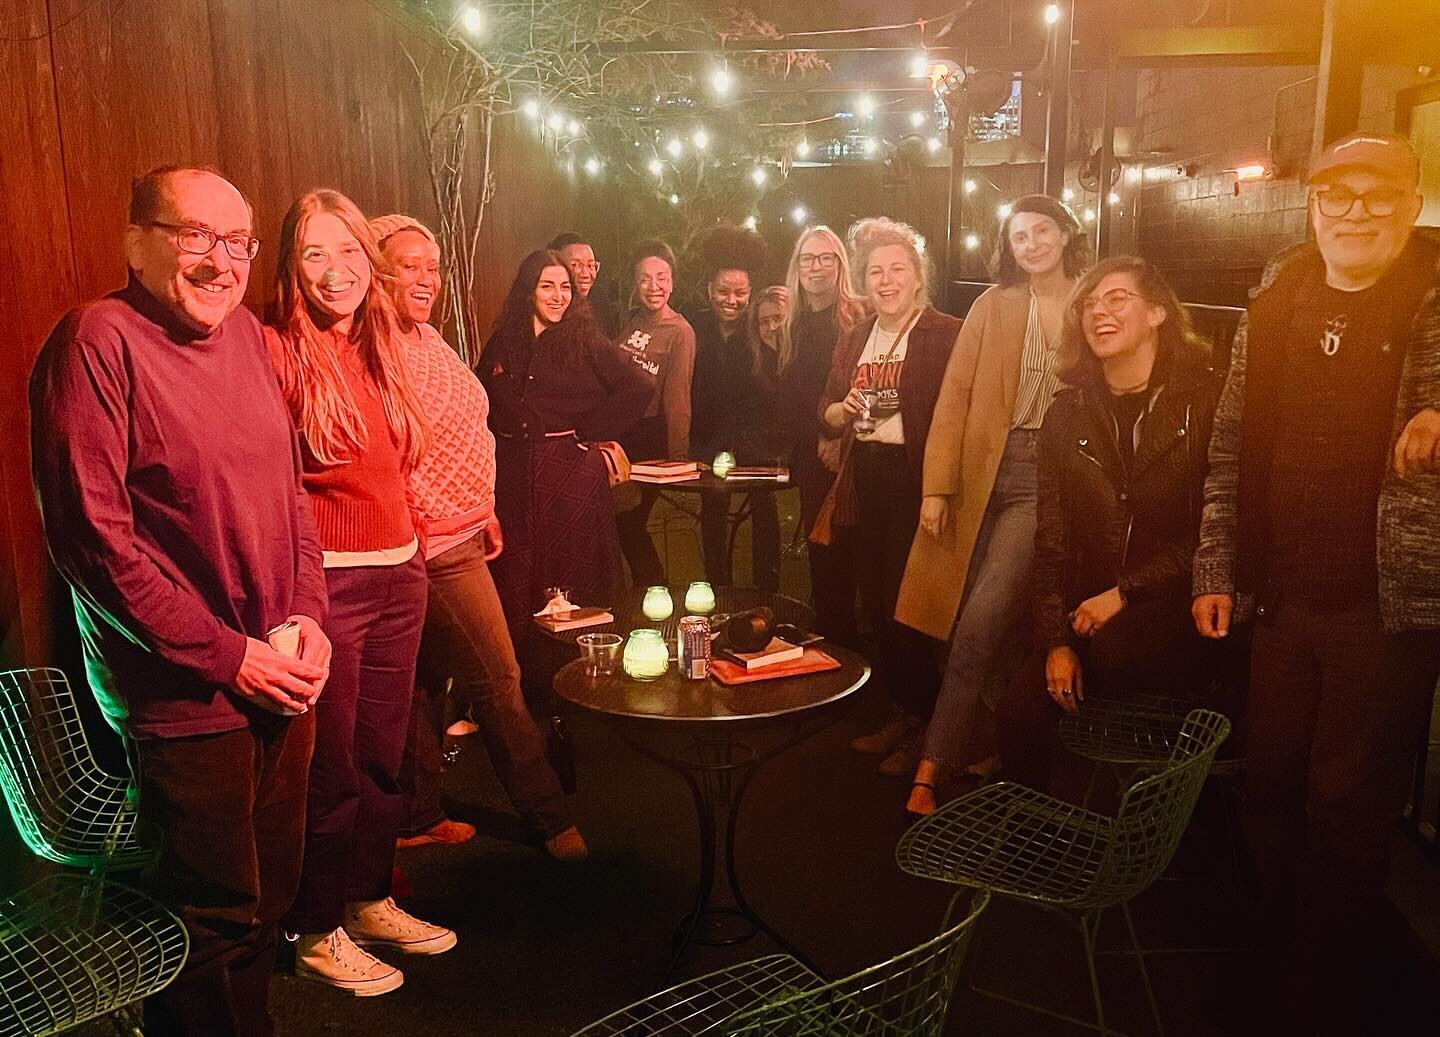 Last night&rsquo;s meeting of the Banned Book Club was great. So much deep discussion plus invigorating conversation to unpack. Join BANNED: A BOOK HAPPY HOUR next month, March 28, for its third meeting. &lsquo;Out of Darkness&rsquo;
by Ashley Hope P